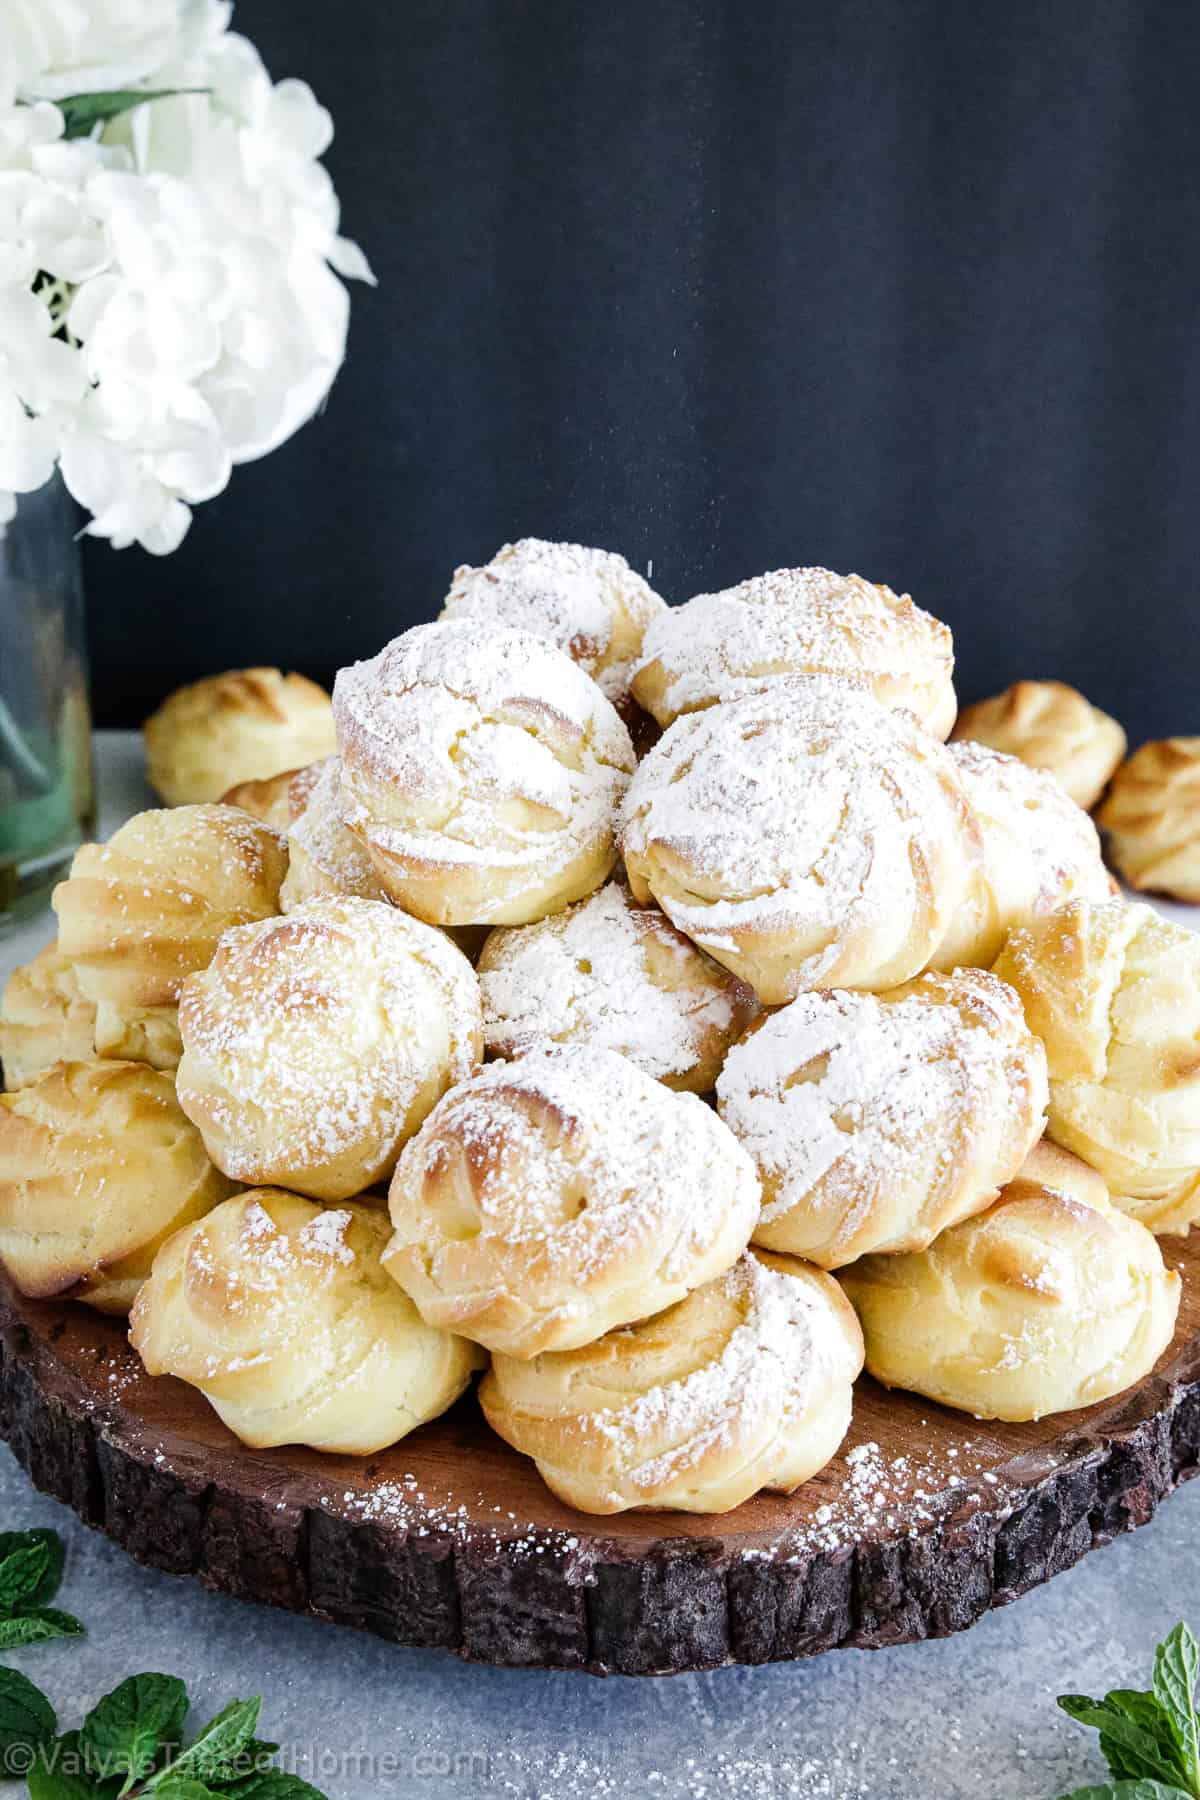 Perfect Cream Puffs Recipe (For Beginners) - The Flavor Bender